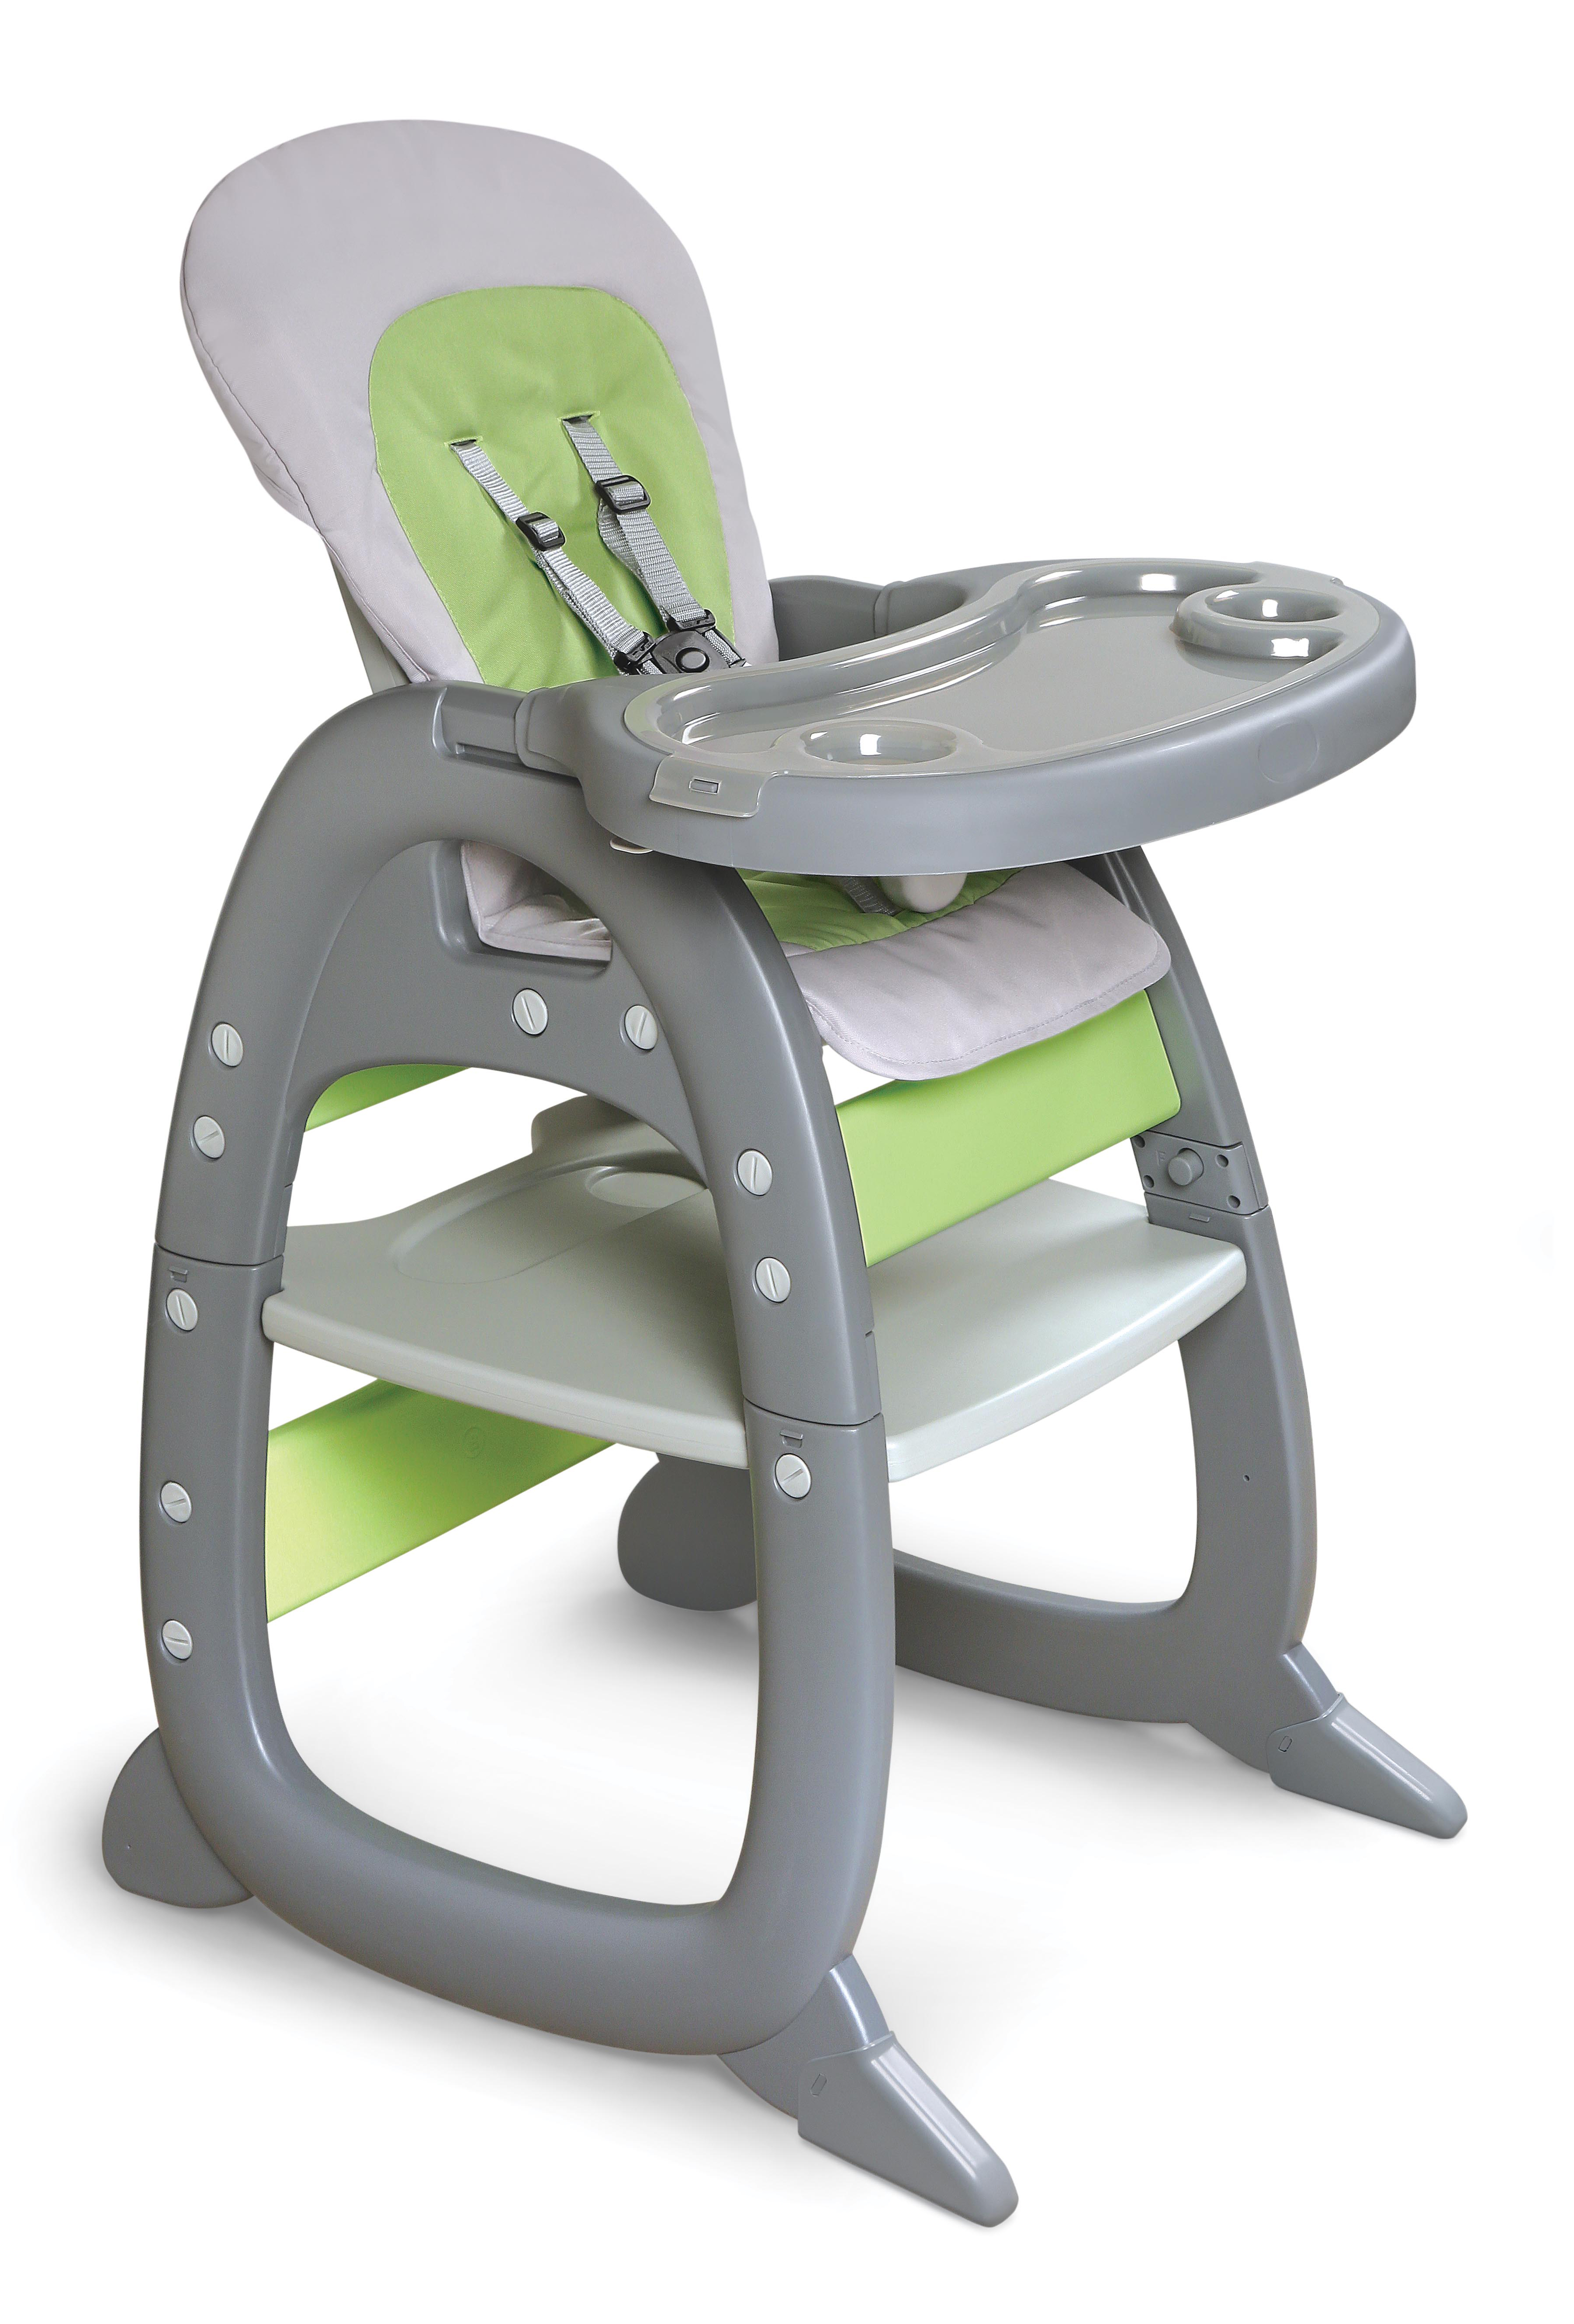 Envee II Baby High Chair with Playtable Conversion - Gray/Green